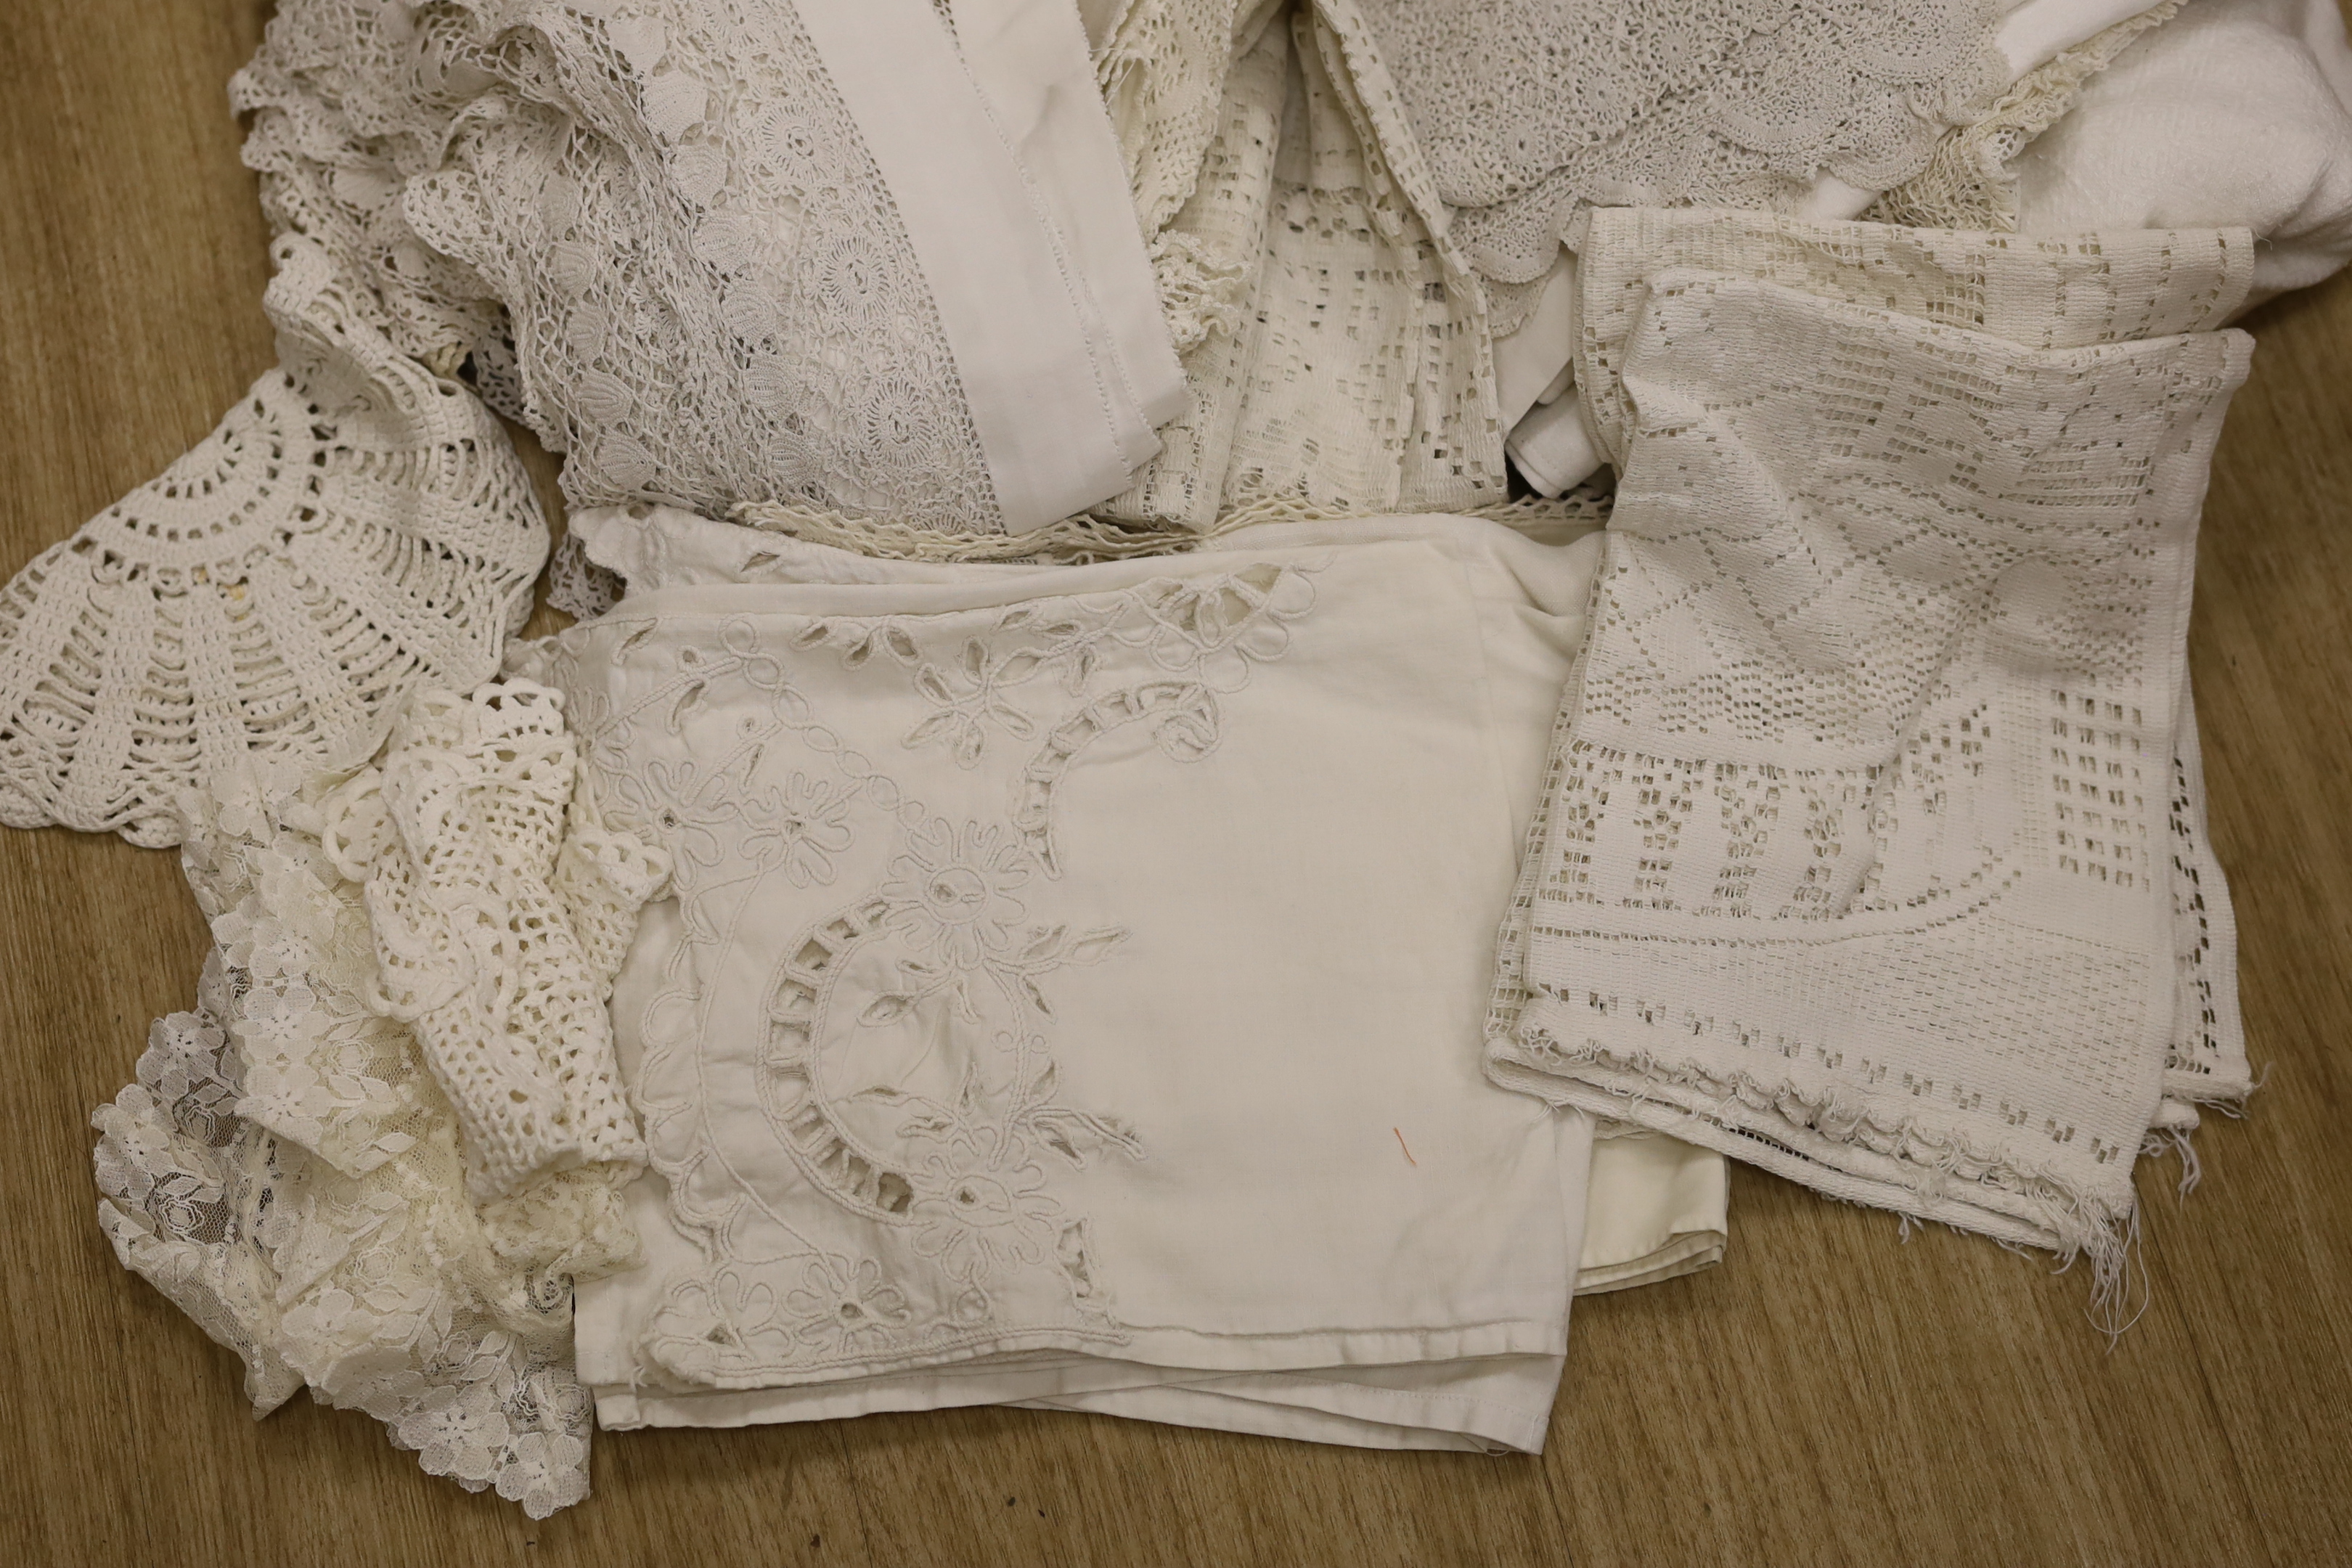 A collection of mixed crochet and embroidered linens